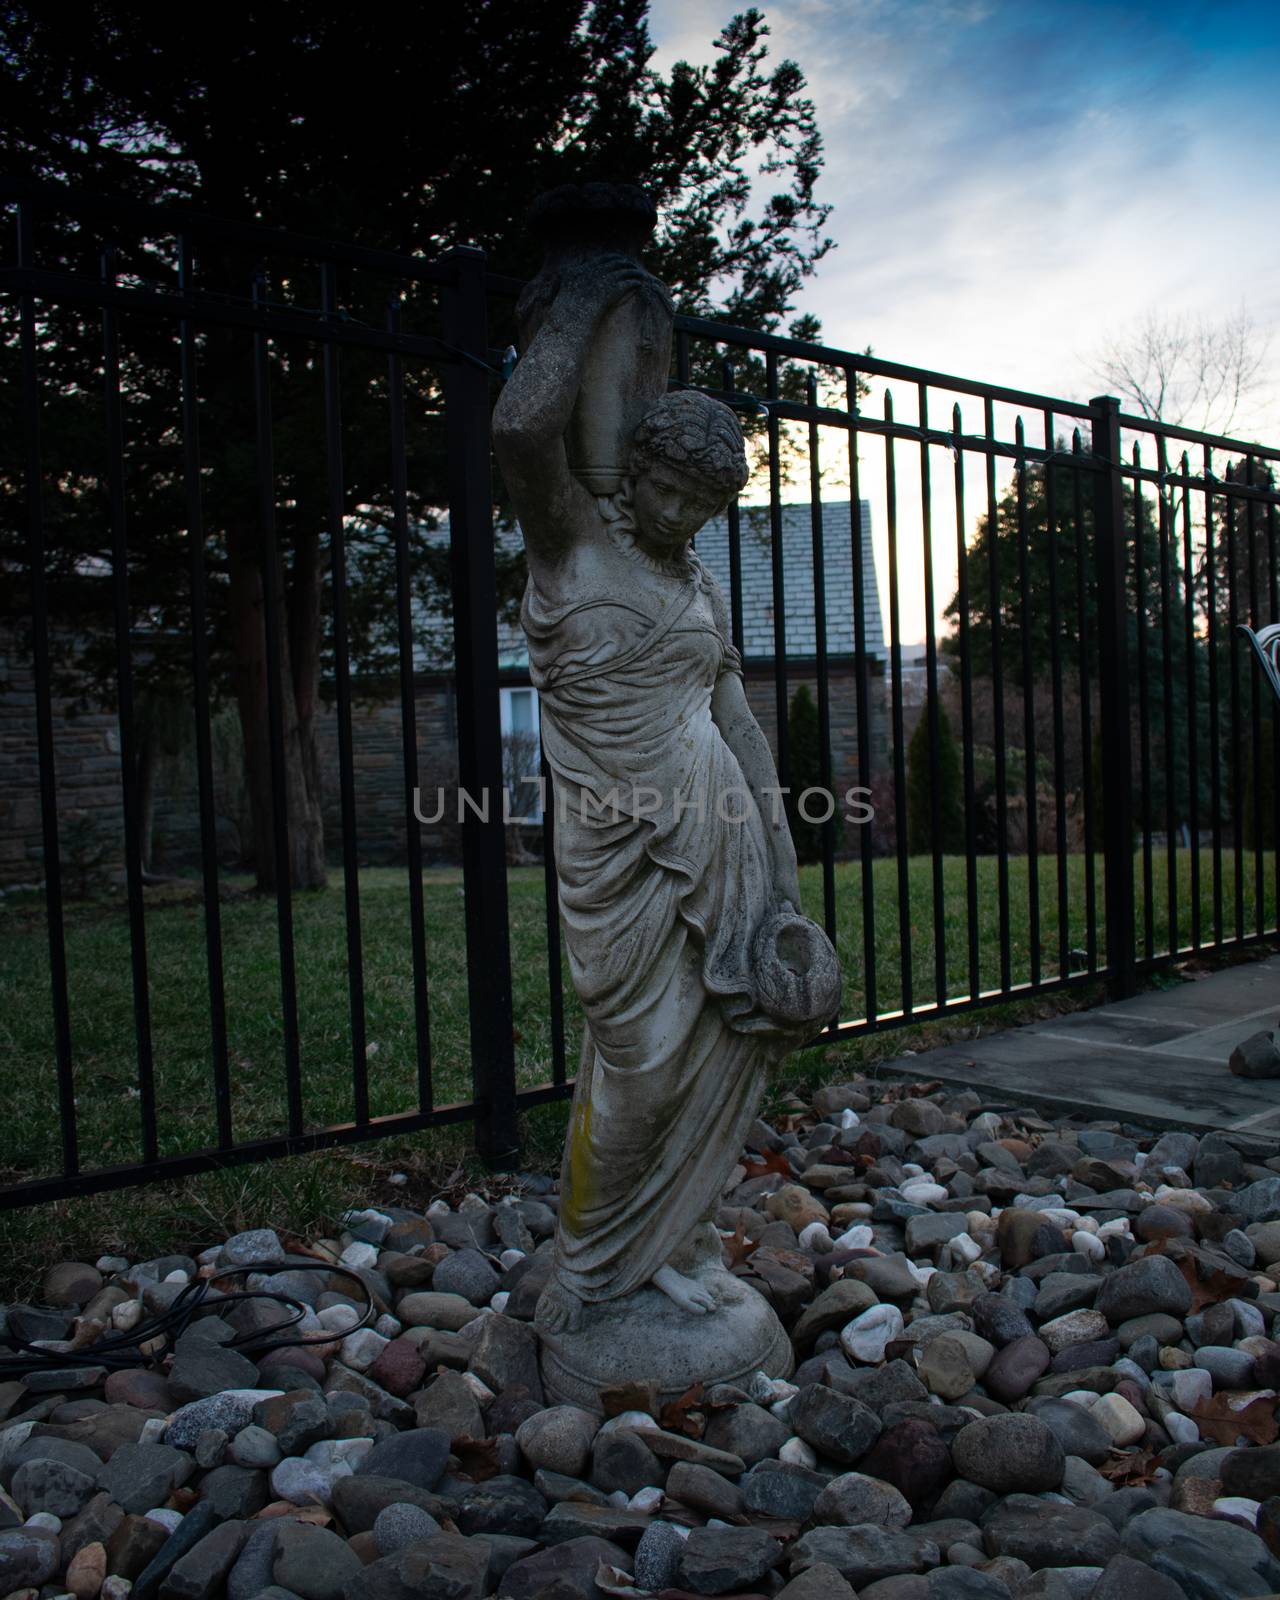 A Statue of a Woman Holding a Vase With the Sunset in the Backgr by bju12290